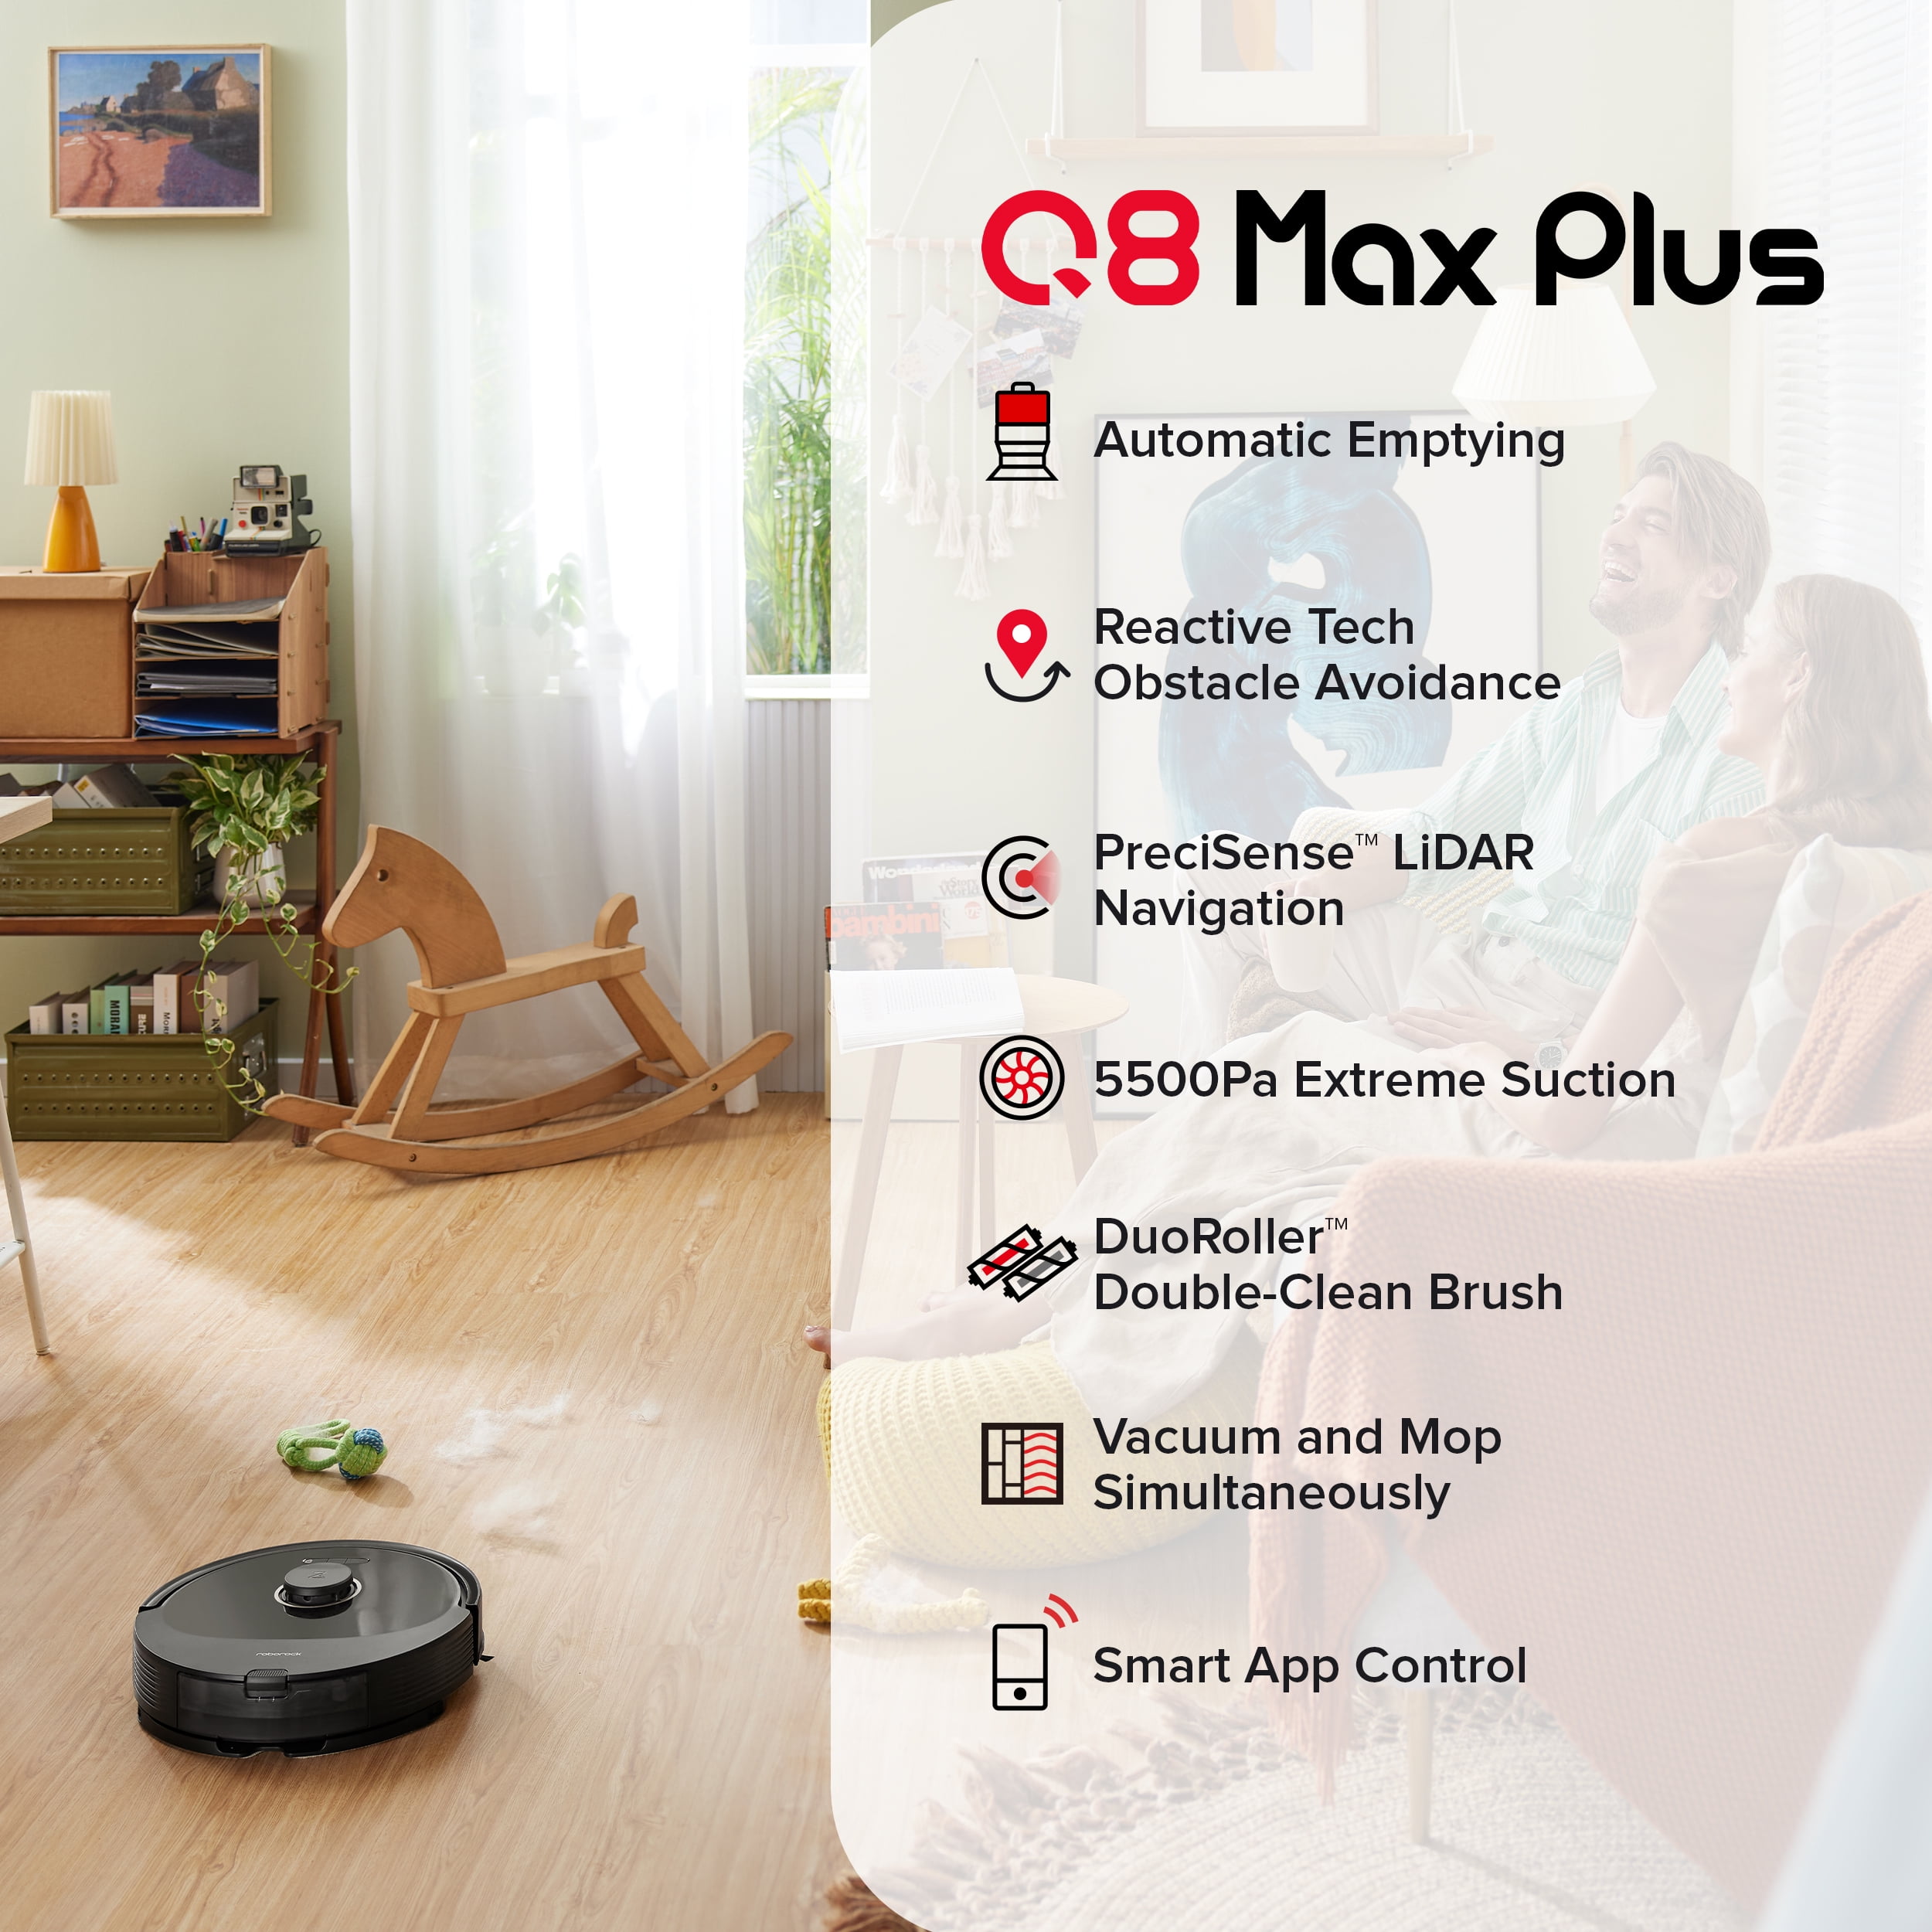 Roborock Q8 Max+ Robot Vacuum Cleaner with Auto Empty Dock, 5500Pa Suction,  DuoRoller Brush, LDS Navigation - Black 